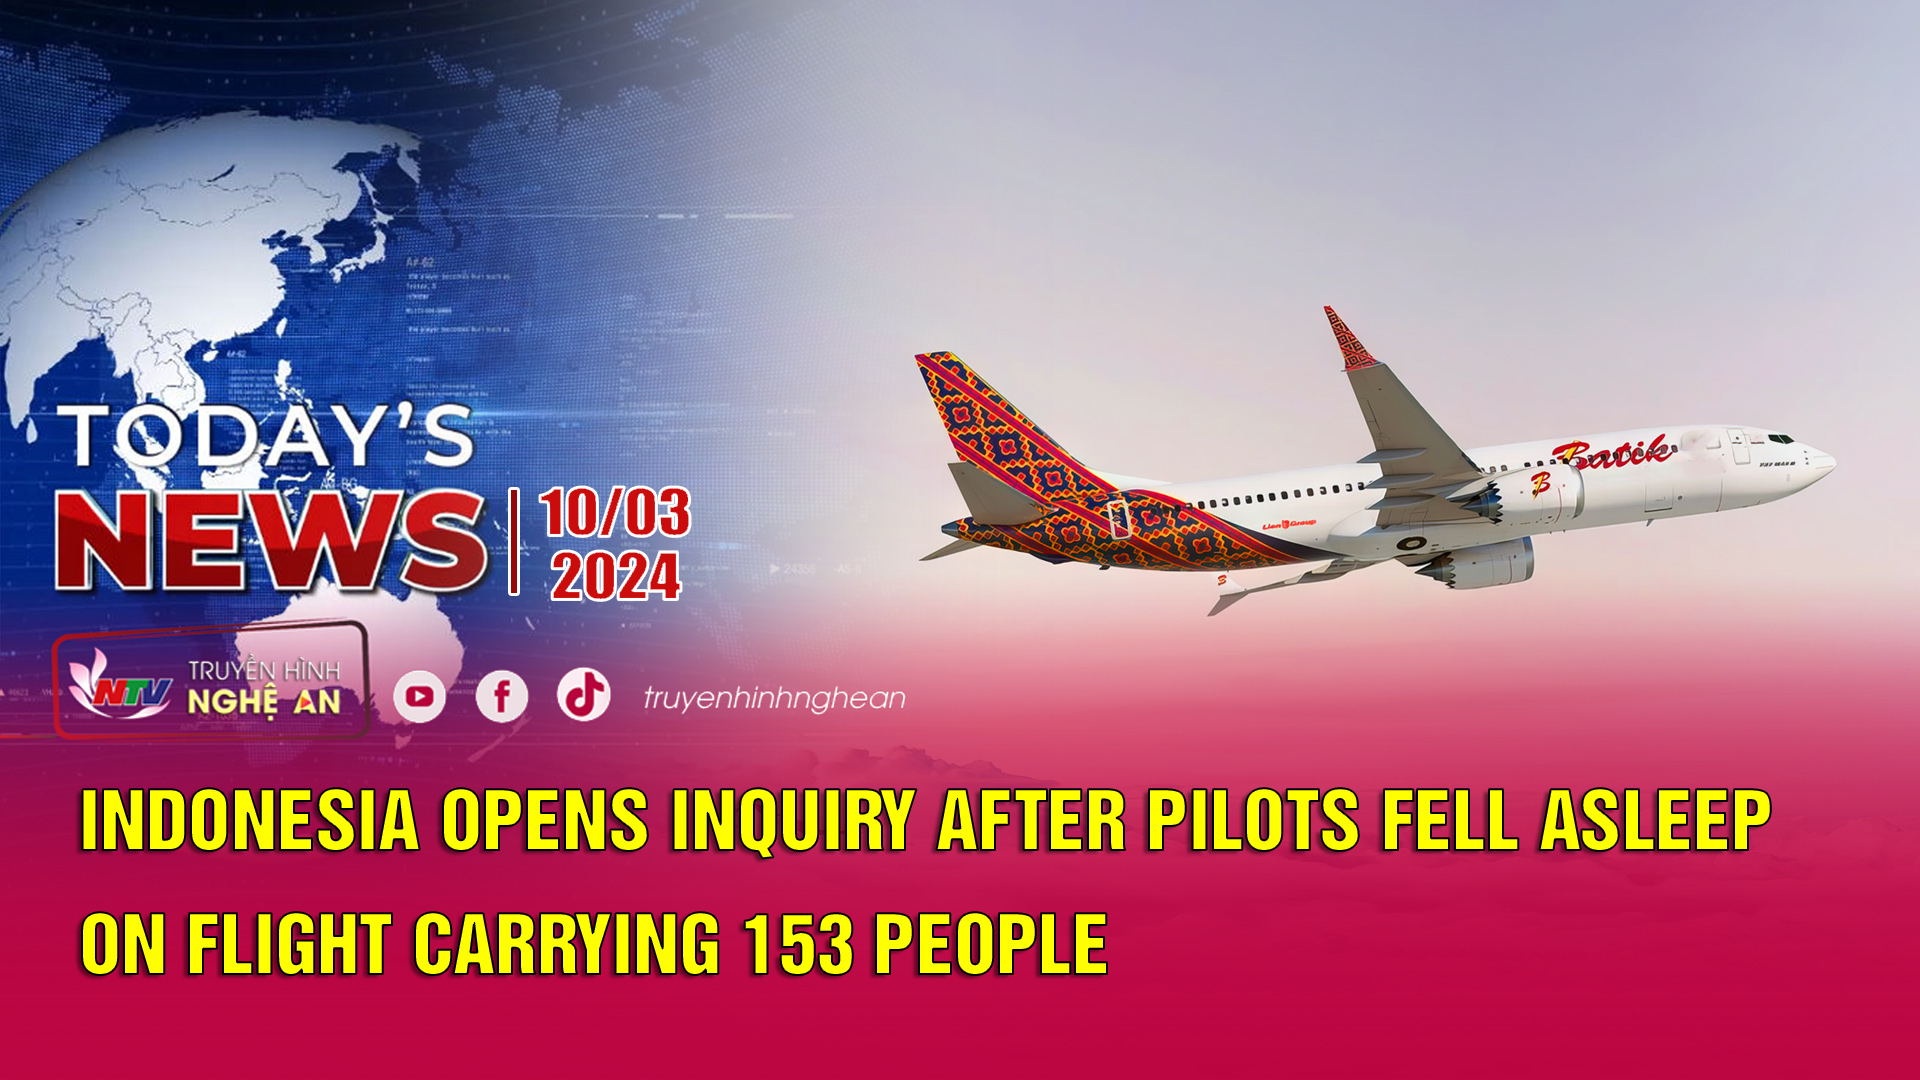 Today's News 10/3/2024: Indonesia opens inquiry after pilots fell asleep on flight carrying 153 people.